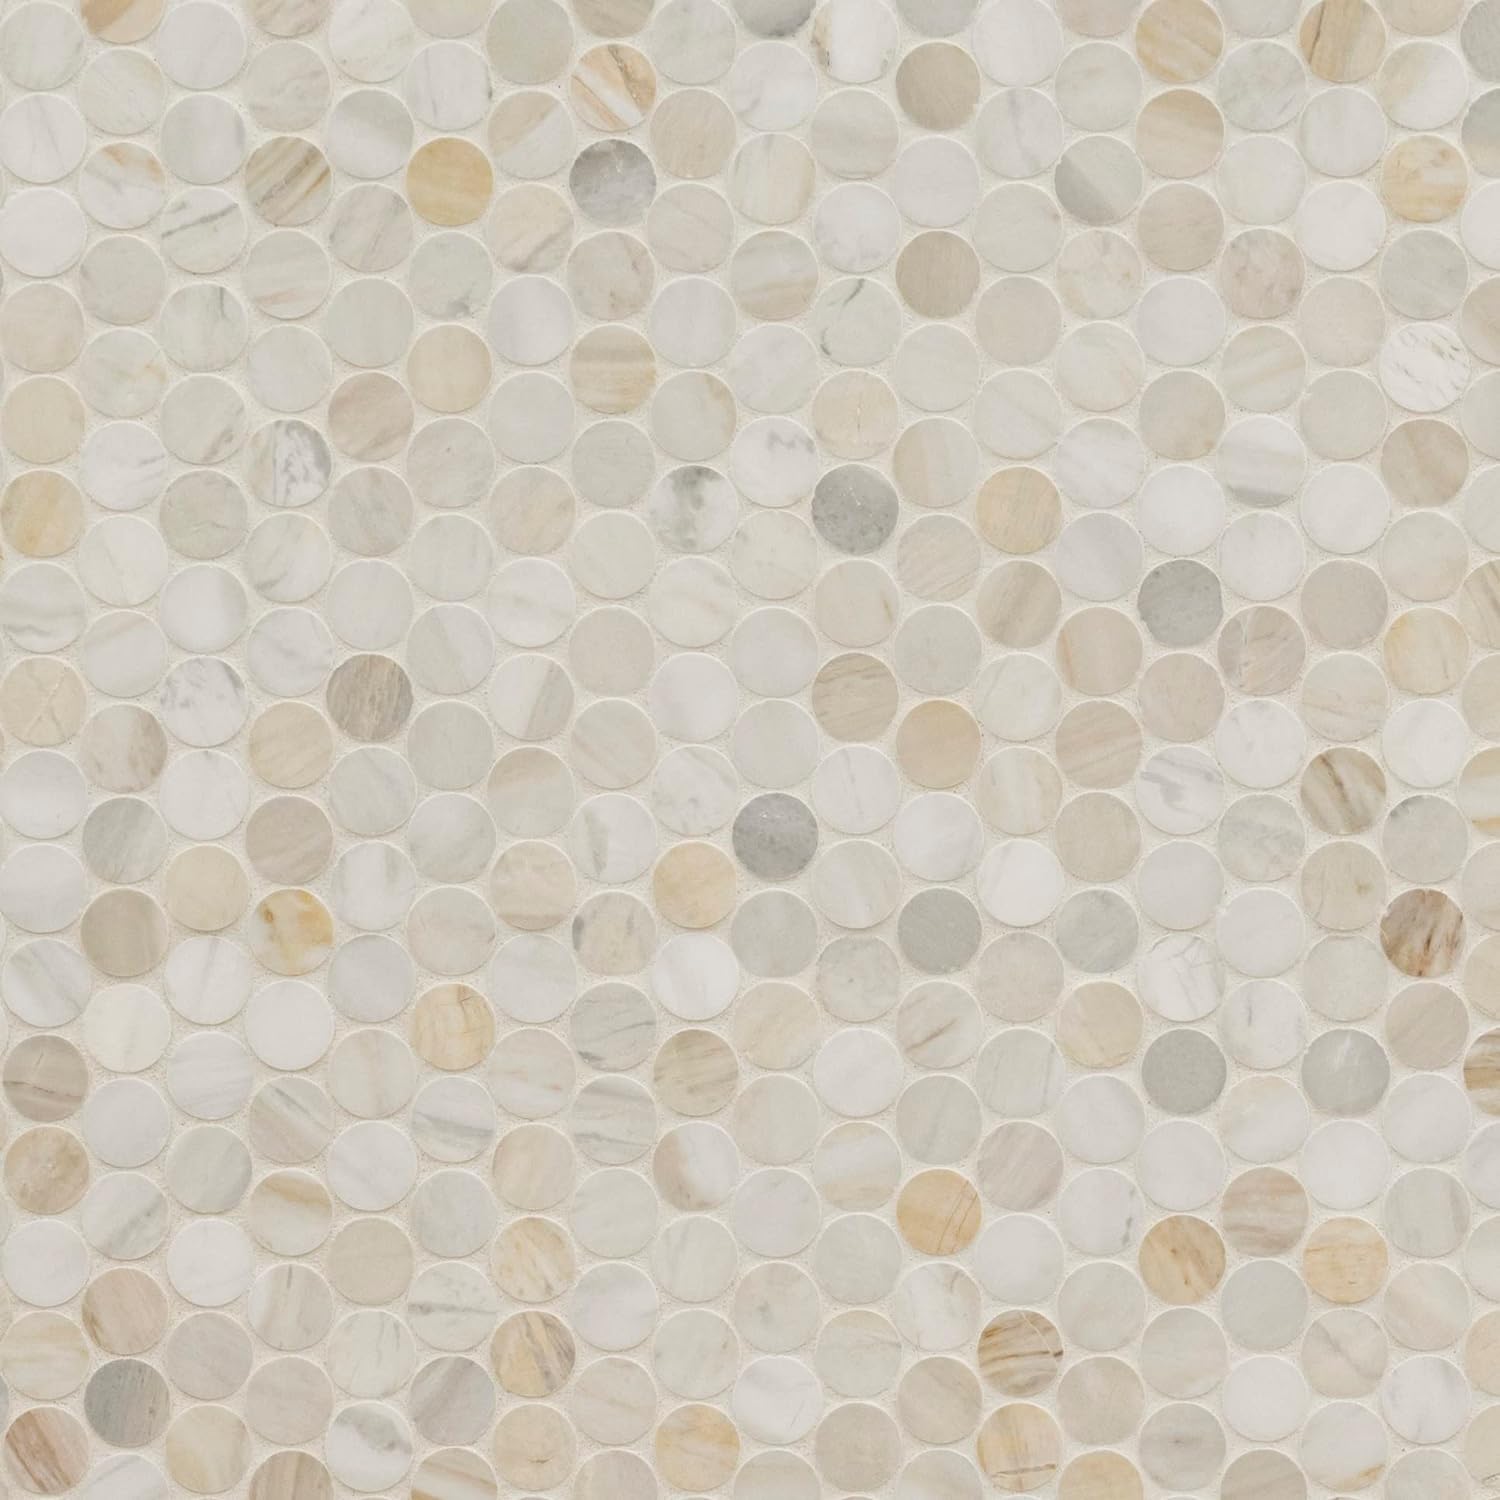 Aurora Gold Pennyround Honed Marble Mesh Mounted Mosaic Tile - Industry Tile